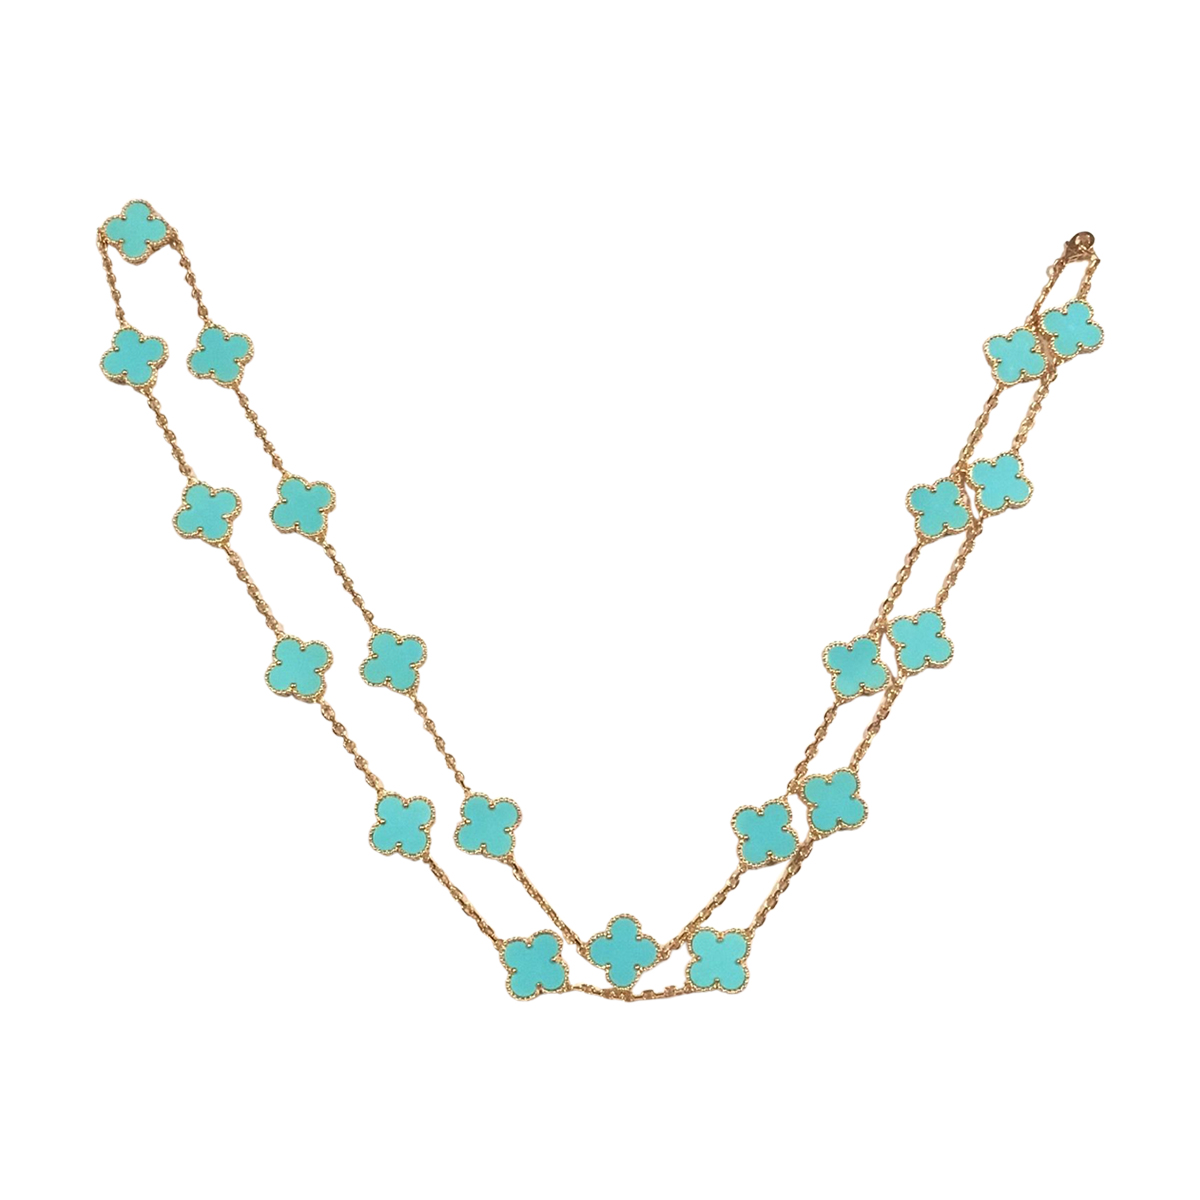 Van Cleef & Arpels 18K Yellow Gold Alhambra 20 Motif Turquoise Necklace | Buy at